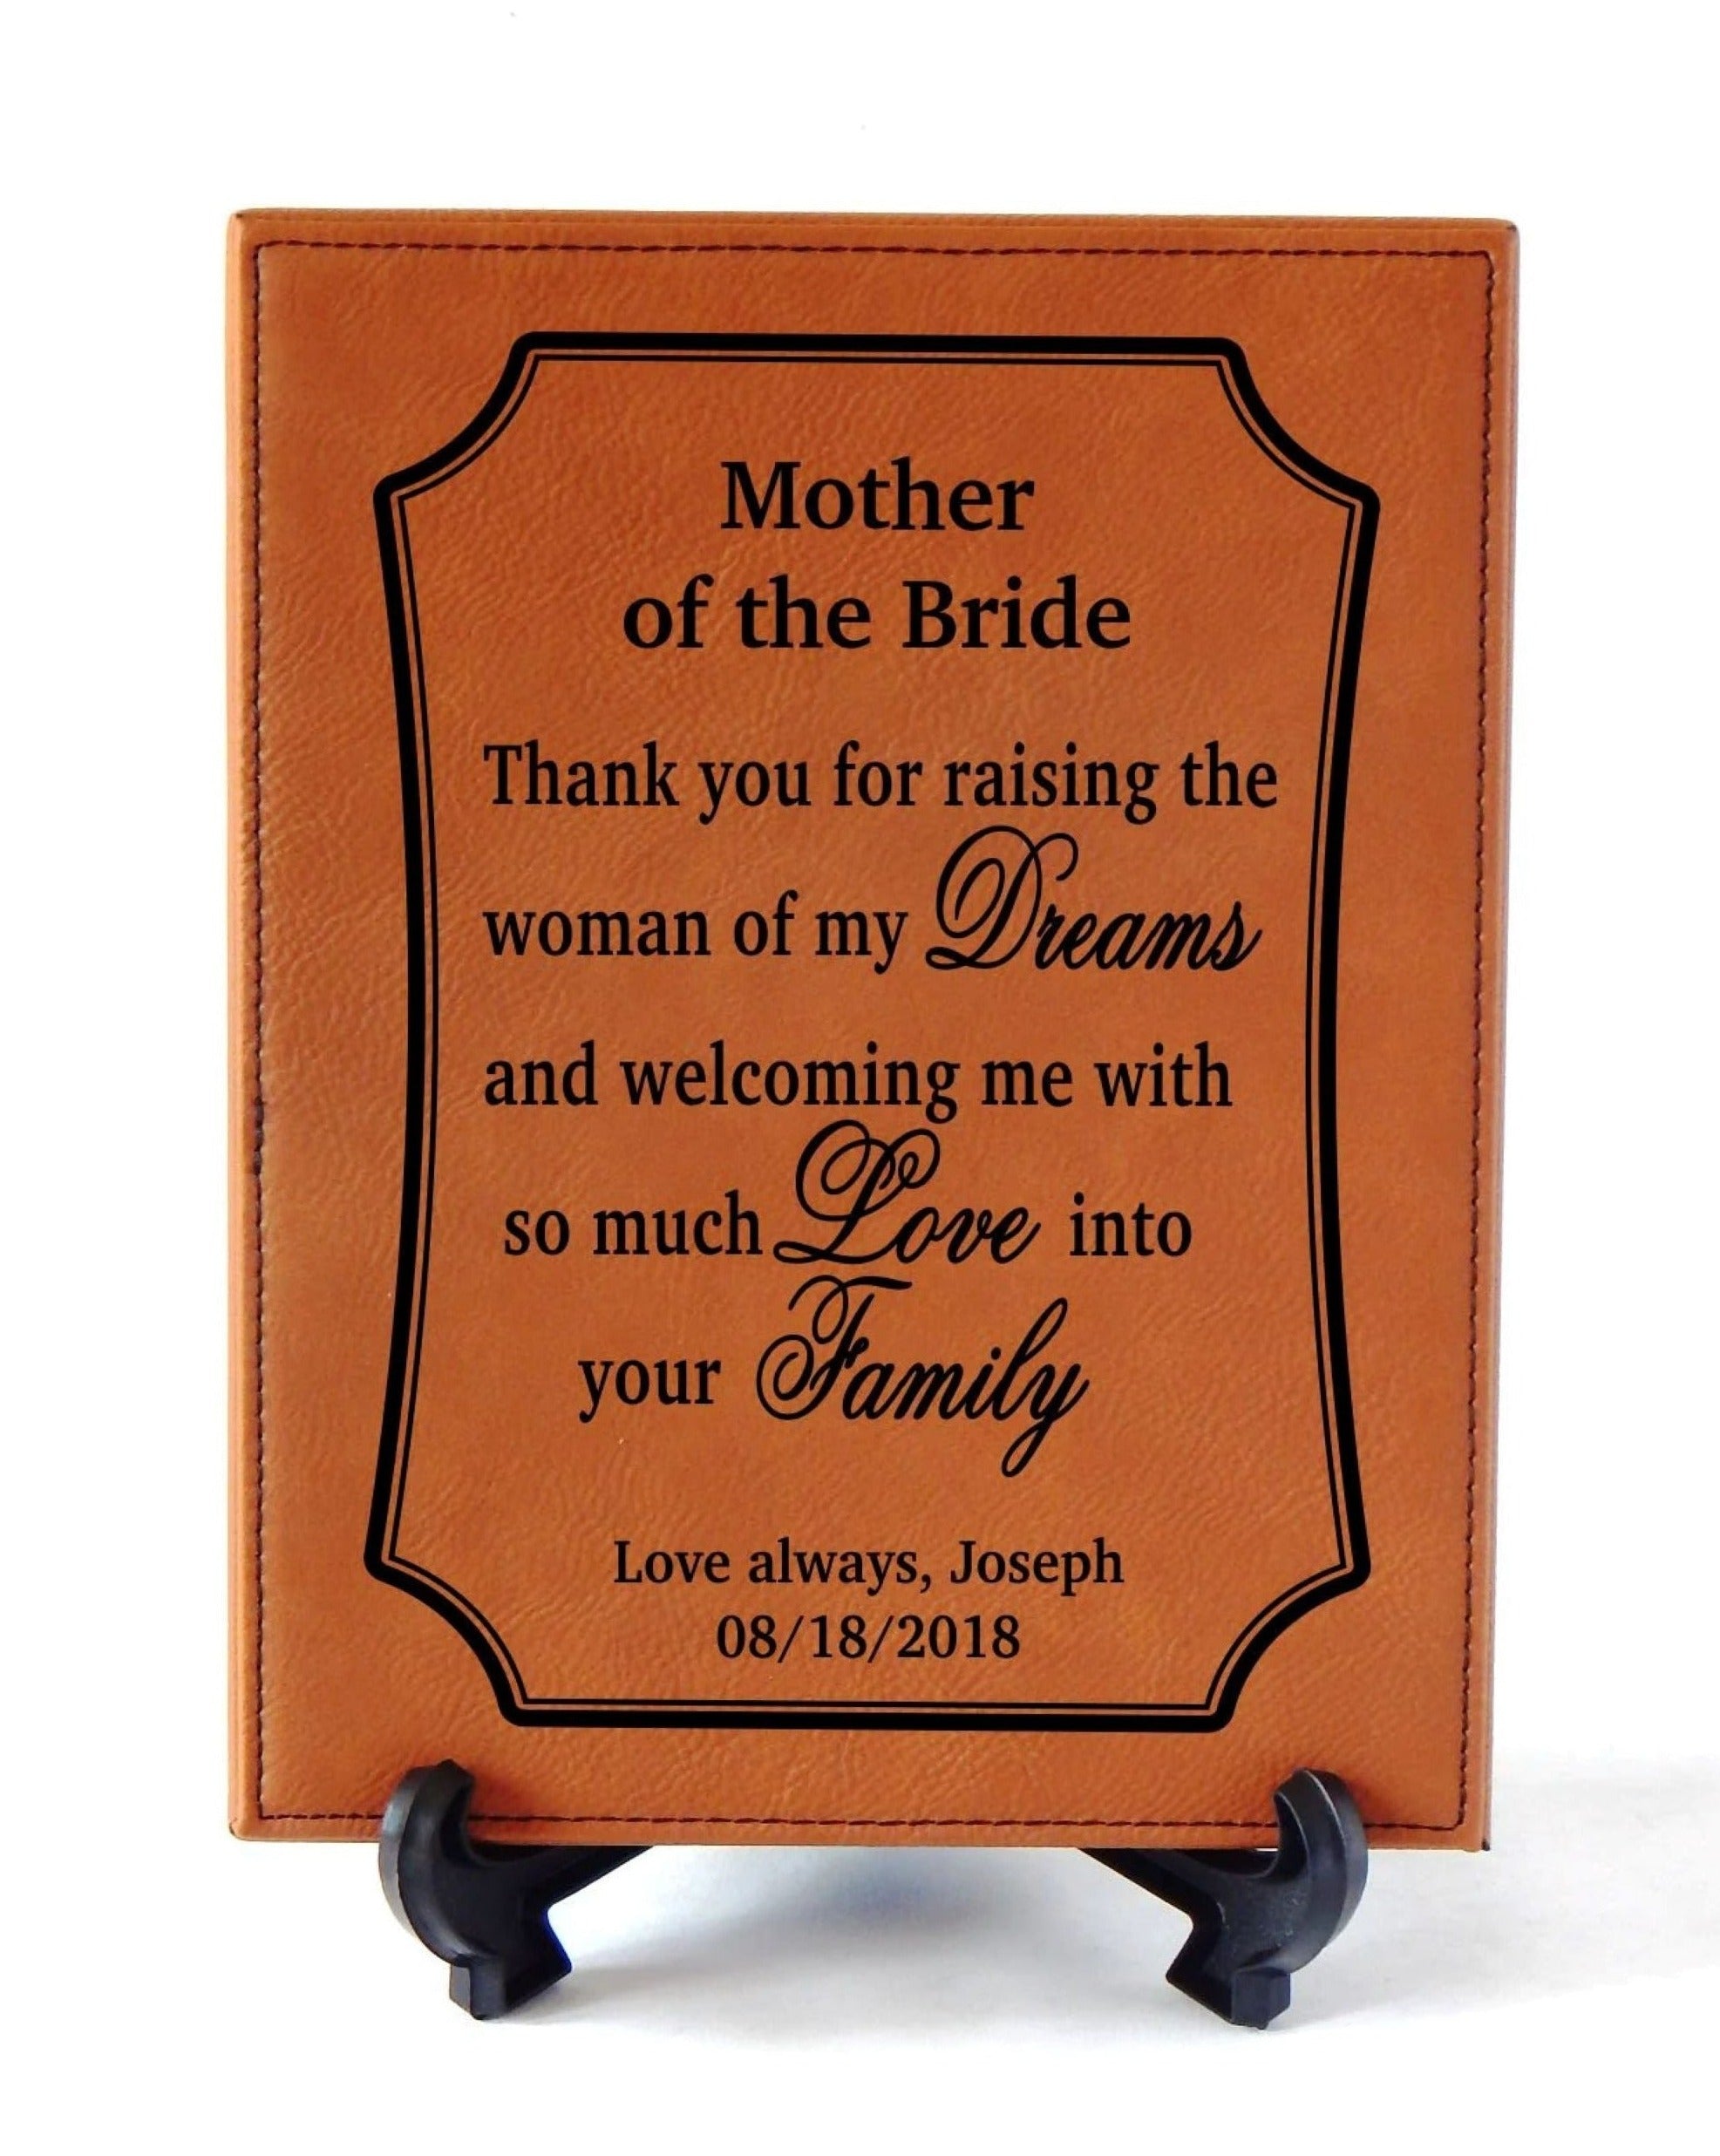 Mother of the Bride Gift from Groom | Wedding Thank you Gift for Parents Engraved Plaque